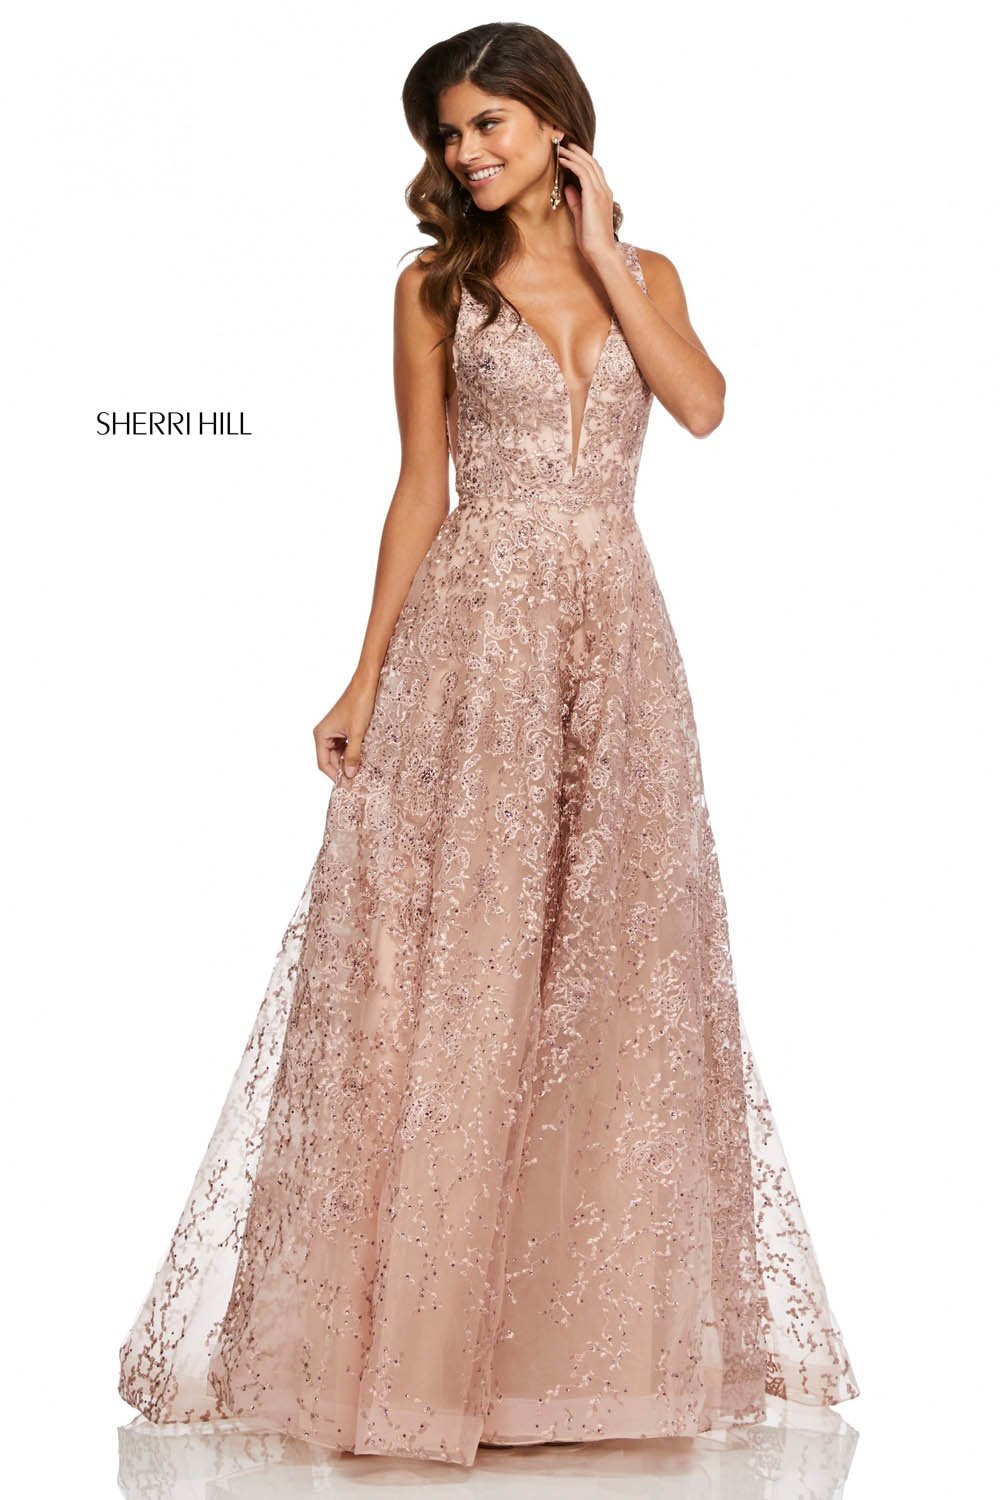 Sherri Hill 52877 dress images in these colors: Blush Nude, Ivory, Light Blue Nude.